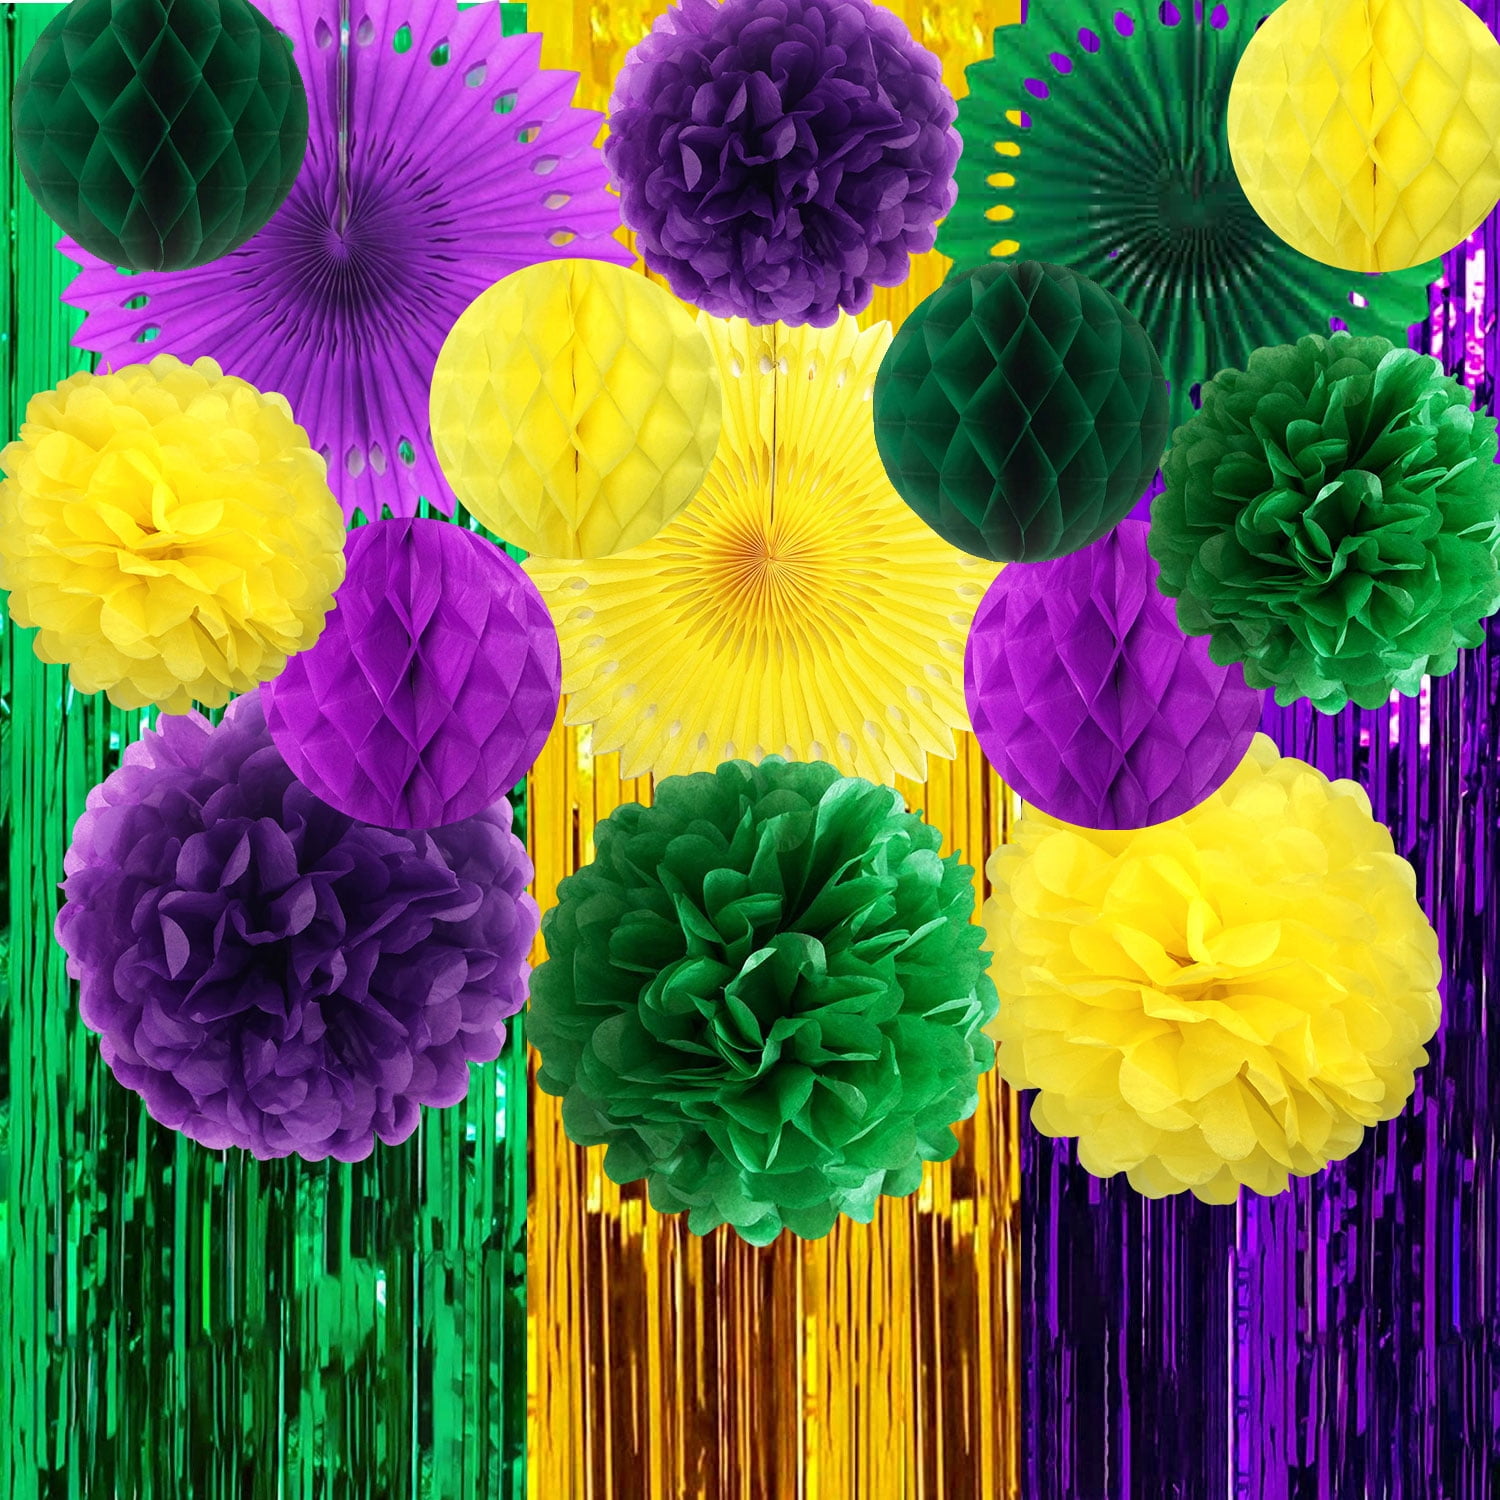  32PCS Mardi Gras Decorations Party Favors Supplies, Mardi Gras  Decor Props Backdrop, Hanging Swirl Tissue Paper Pom Poms Garland Flowers  for Birthday Baby Shower : Home & Kitchen